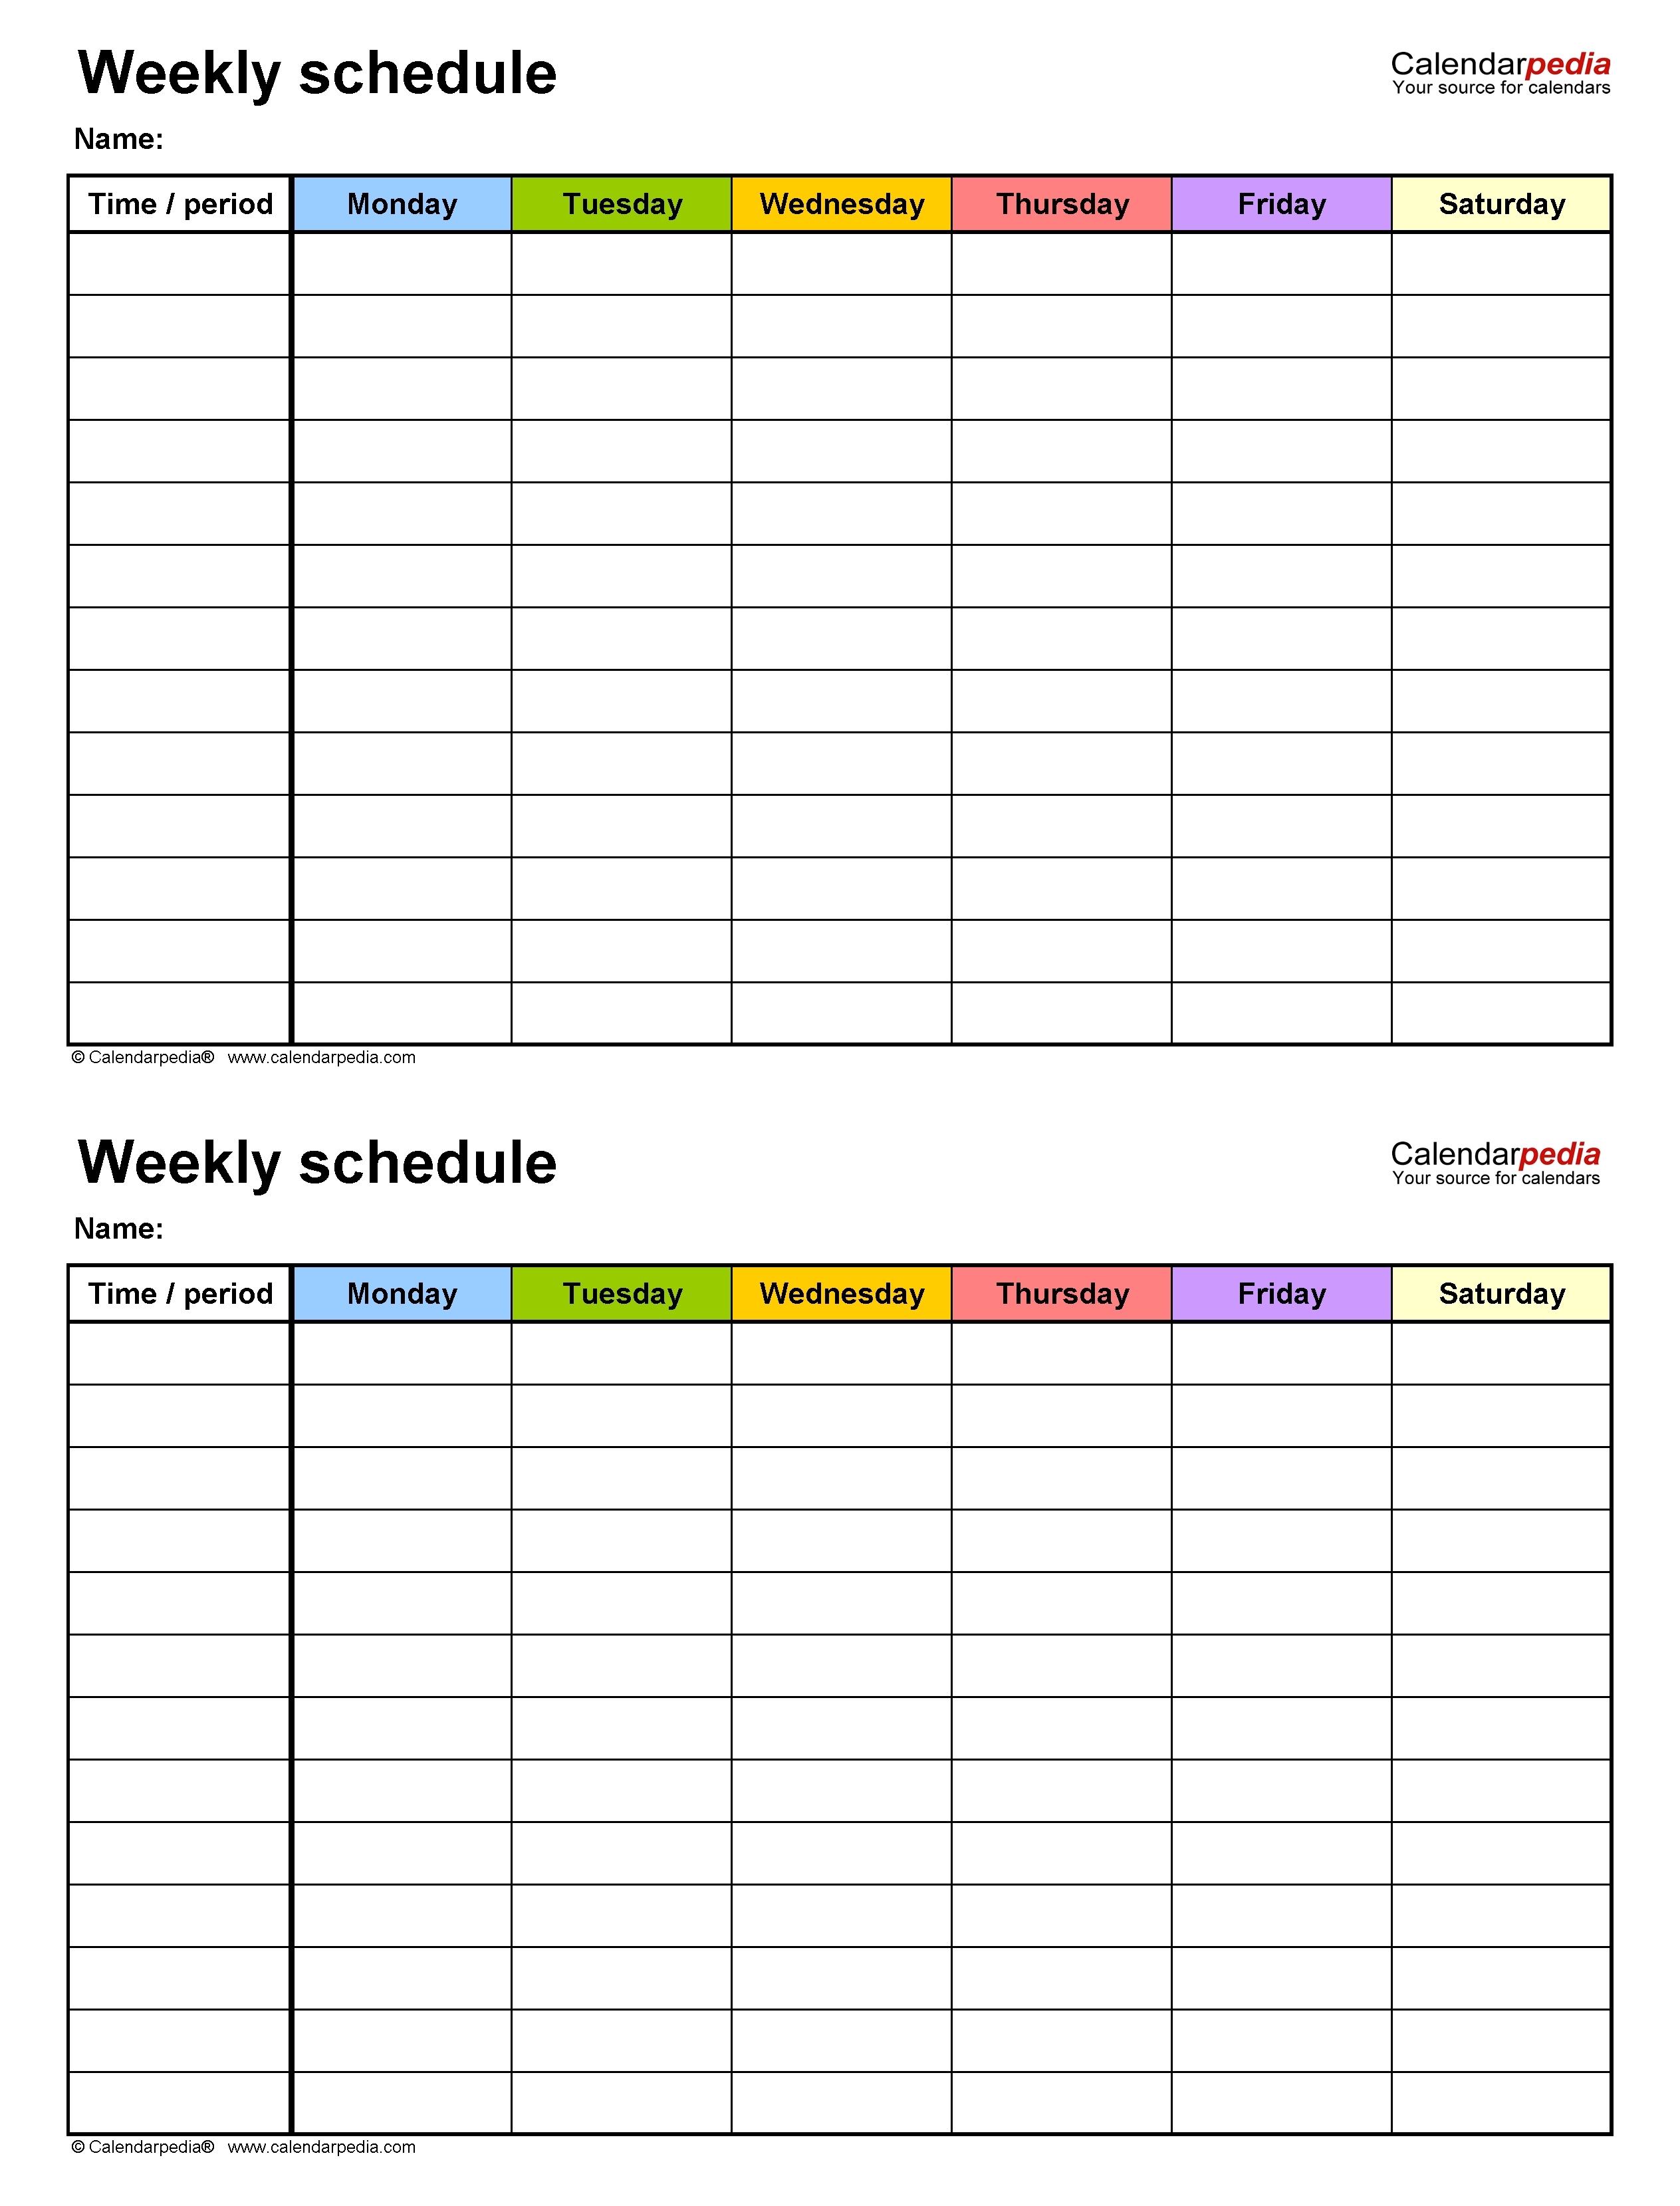 Free Weekly Schedule Templates For Word - 18 Templates 2 Week Calendar Template Word